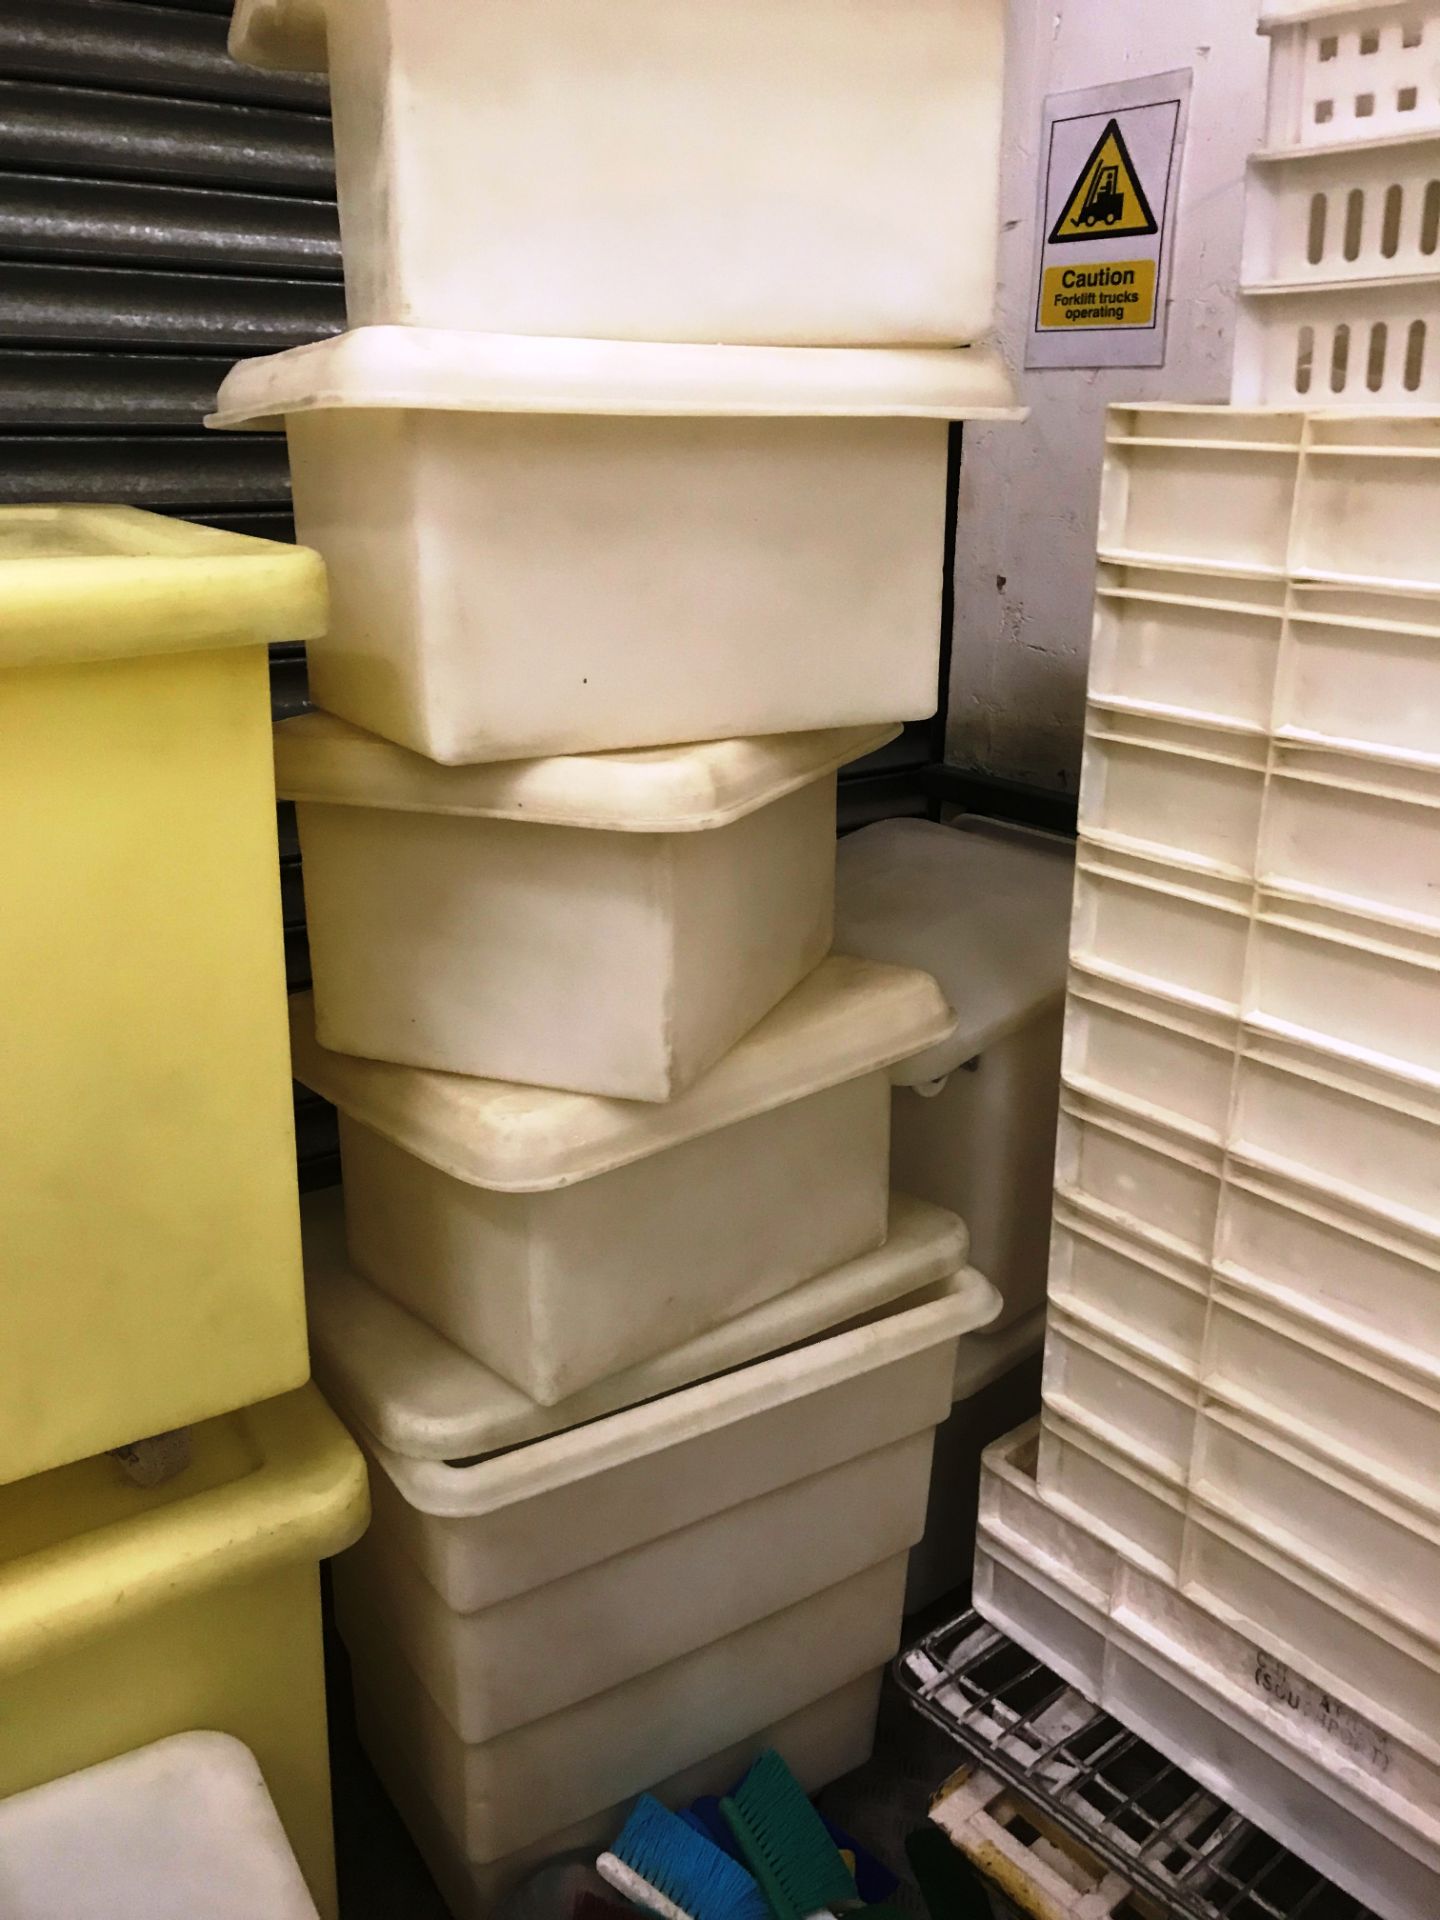 Mixed Lot of Ingredient Bins, Trays & Utensils - As Pictured - Image 3 of 5